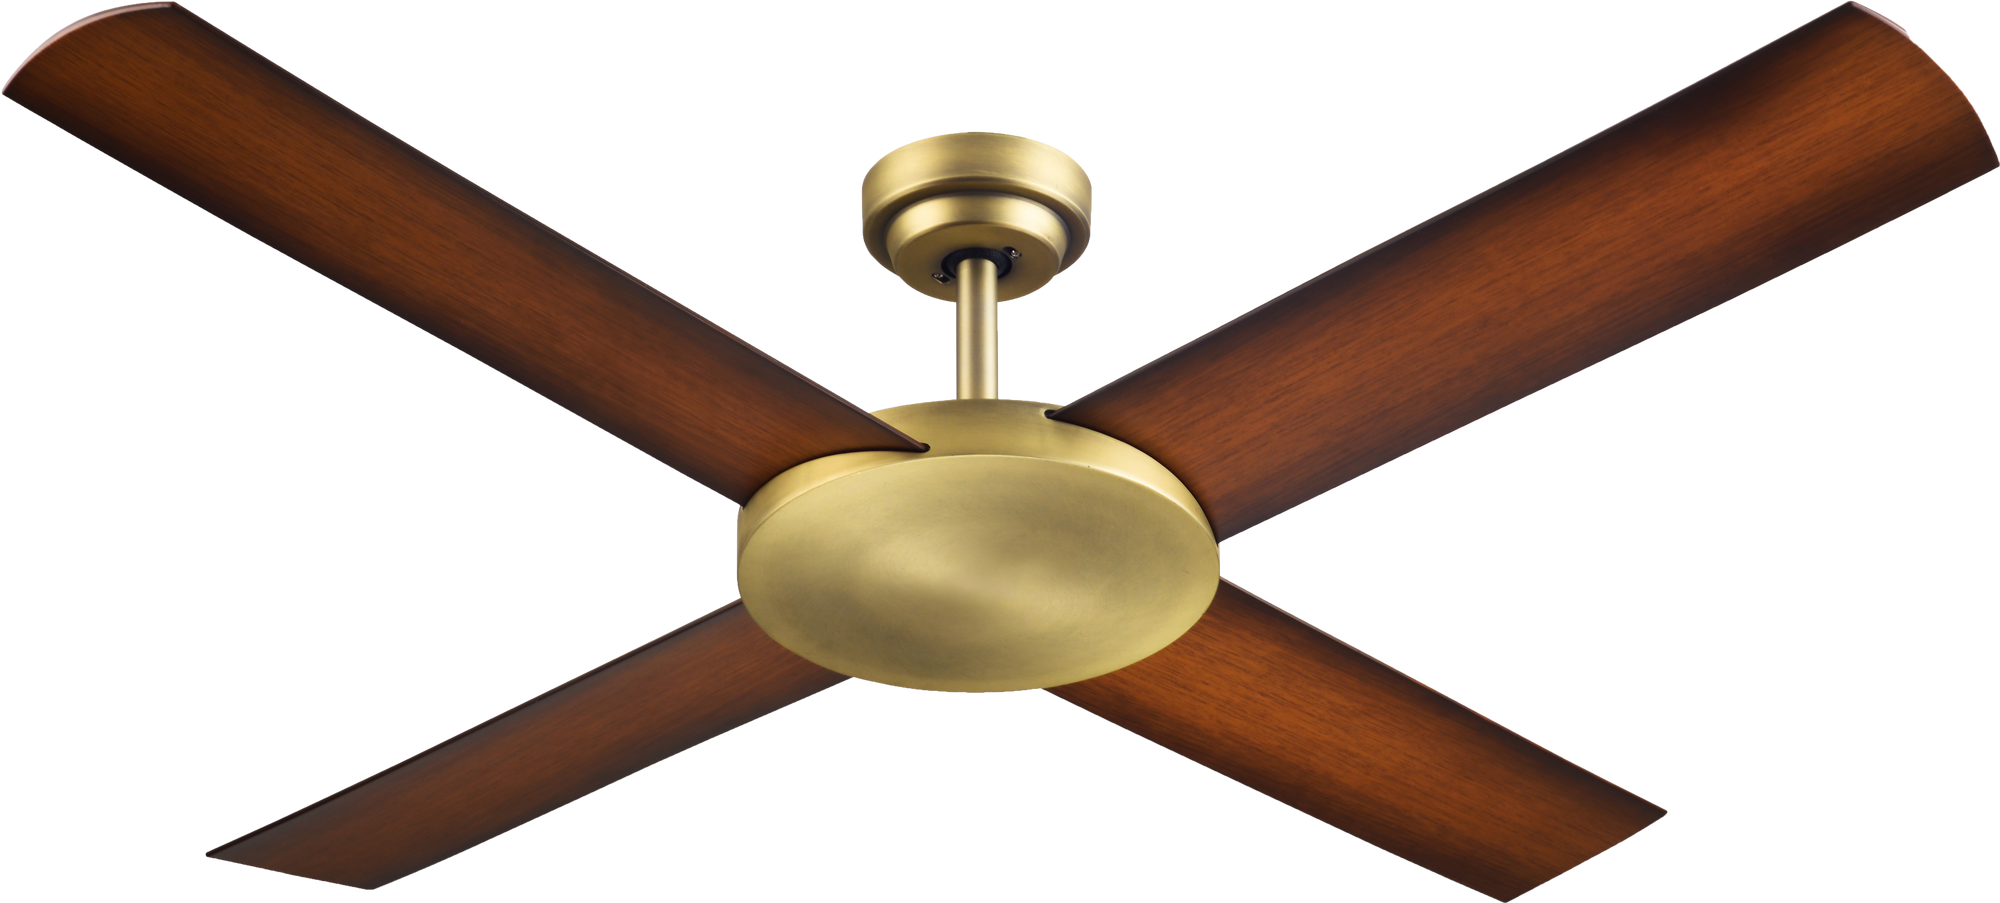 Revolution 3 Antique with Koa Blades 52" Indoor/Outdoor Ceiling Fan with Wall Control